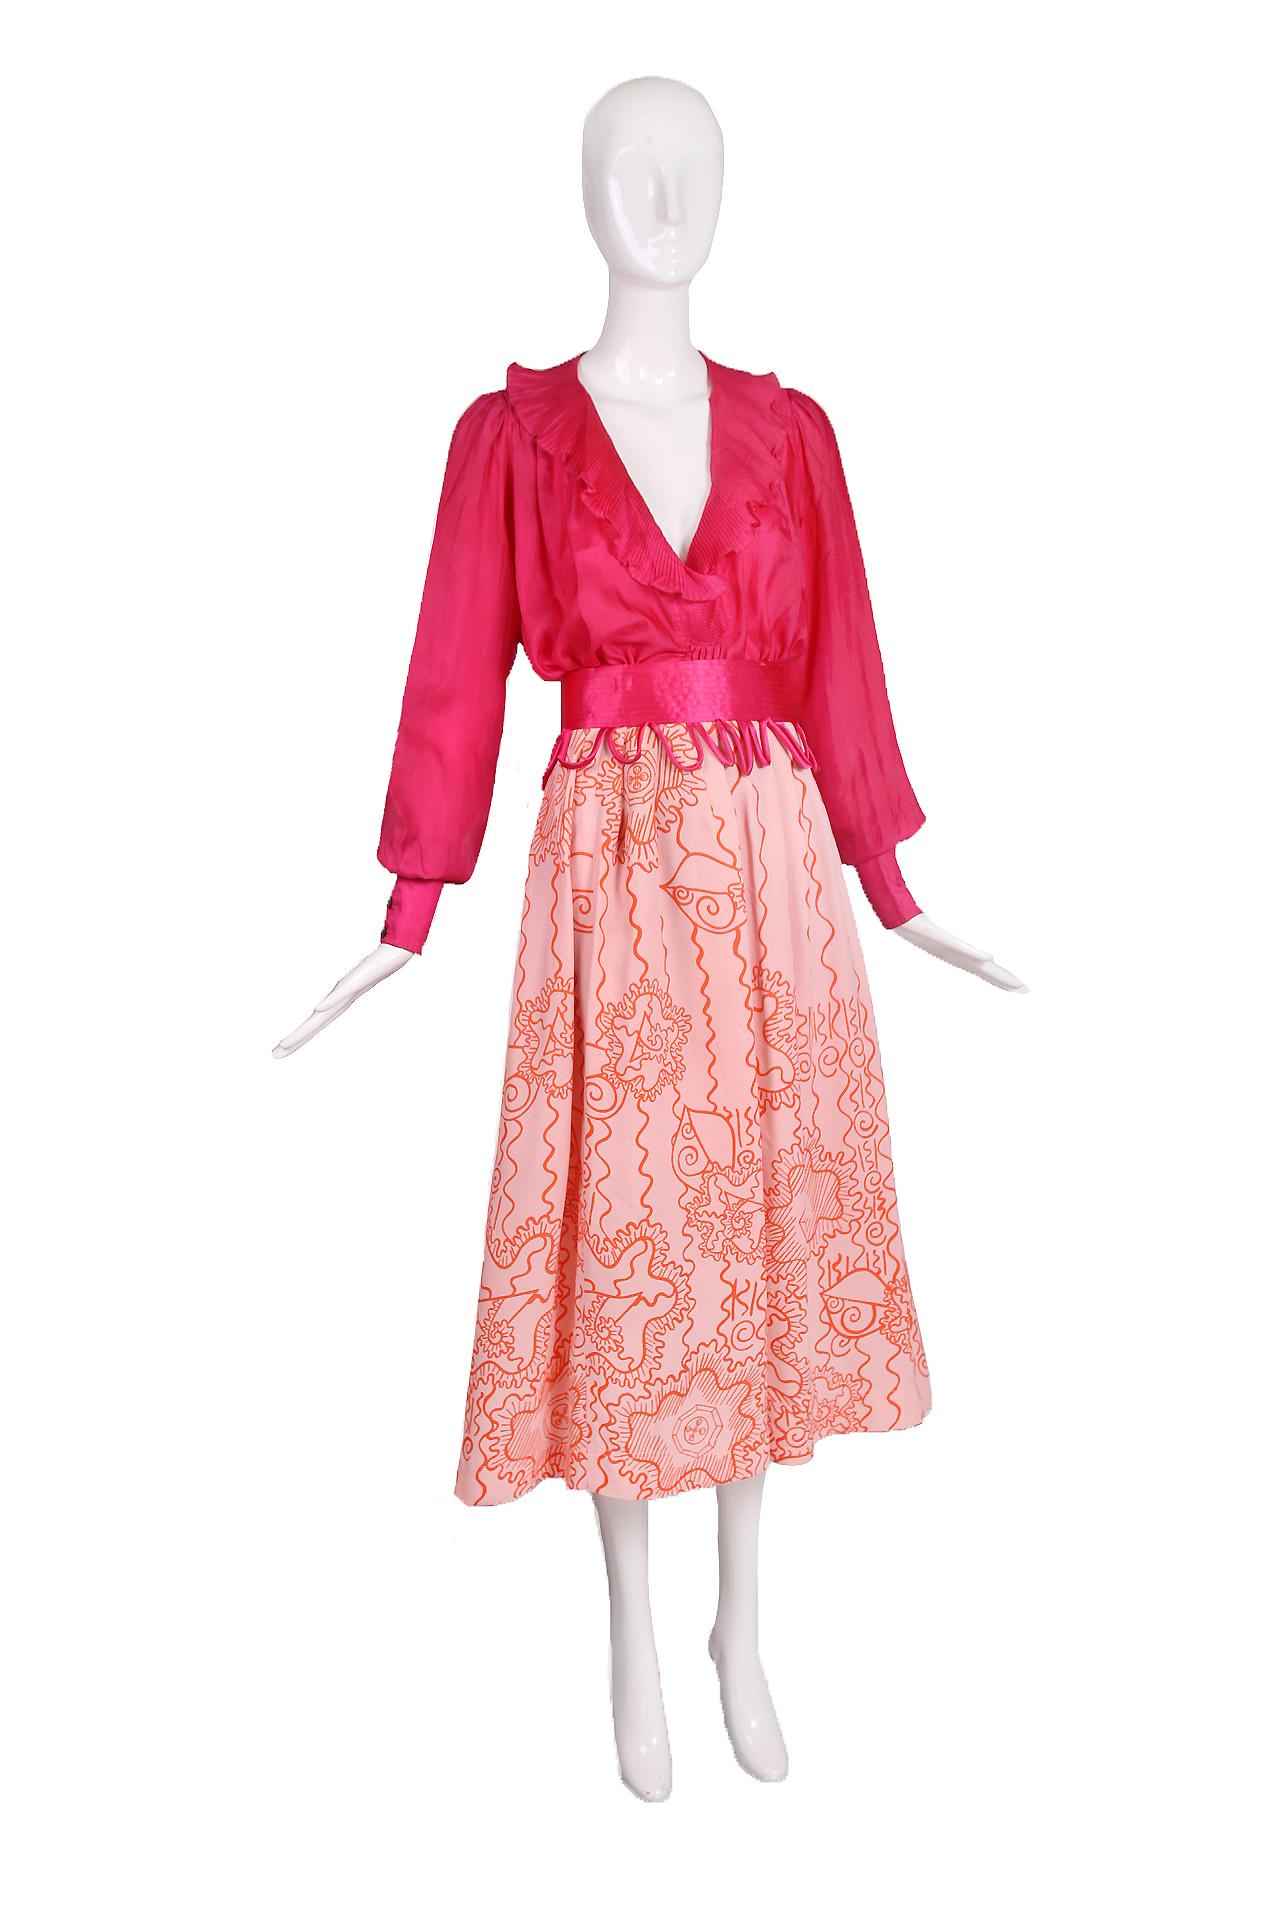 Vintage Zandra Rhodes fuchsia silk poet blouse and pale peach rayon skirt w/orange abstract print & hot pink waist band. Blouse has an oversize fit and is 100% water silk - size tag S. Skirt is 100% rayon - size tag UK 10. Skirt is in excellent